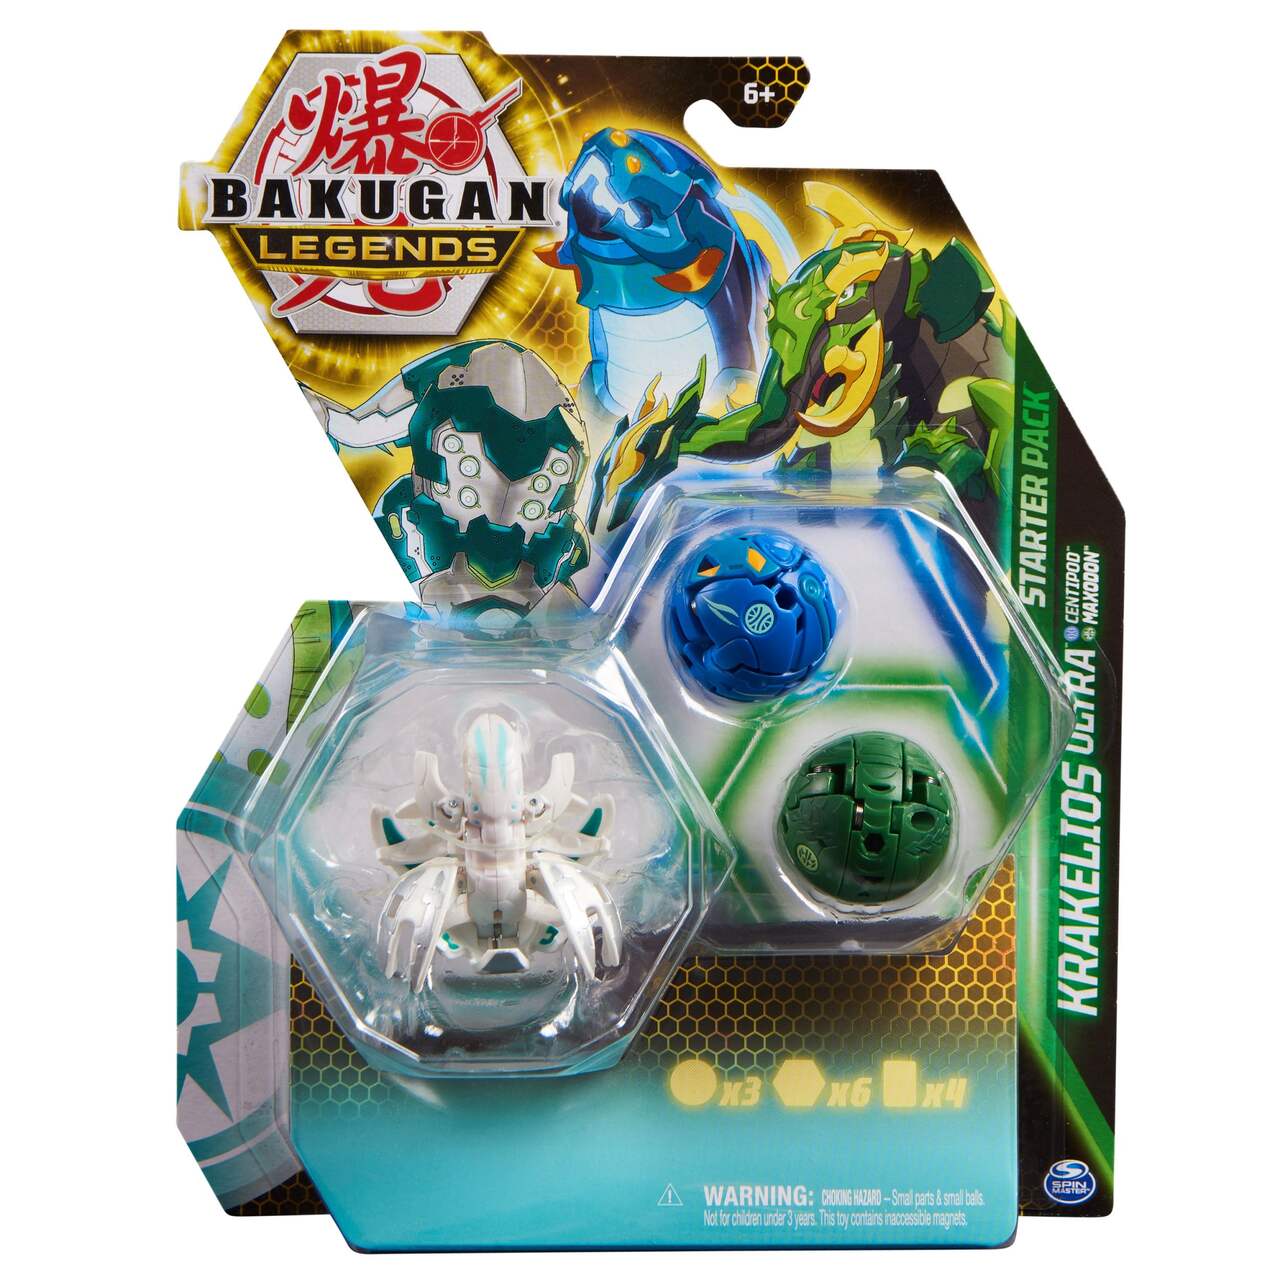 Bakugan Legends Starter Pack Transforming Creature Action Figure Toy,  Assorted, Ages 6+